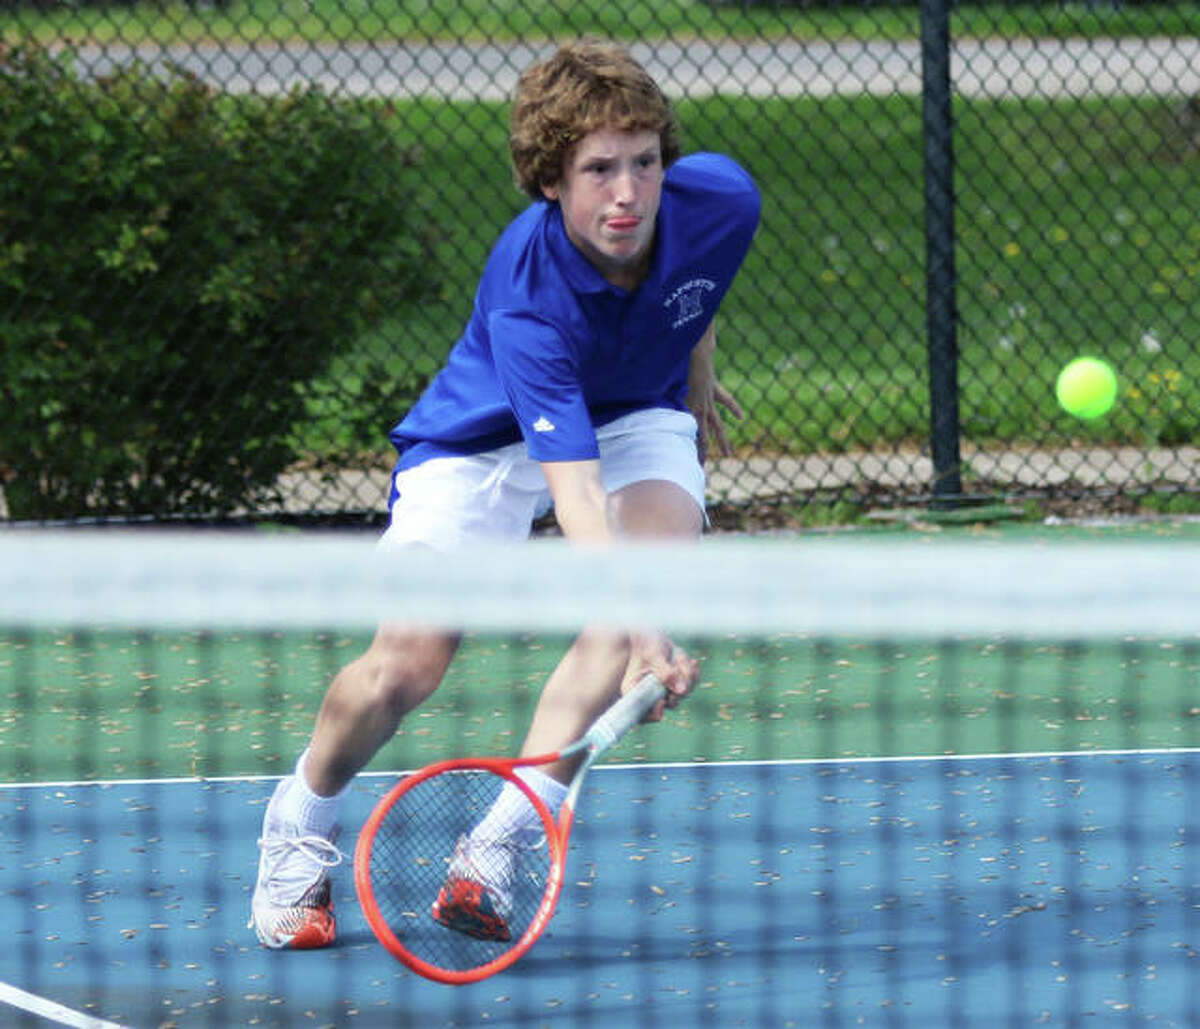 Marquette Catholic freshman Bradley Bower rushes toward the net to hit a return in his No. 1 singles victory against the Alton Redbirds on Thursday at Moore Park’s Simpson Tennis Center in Alton.